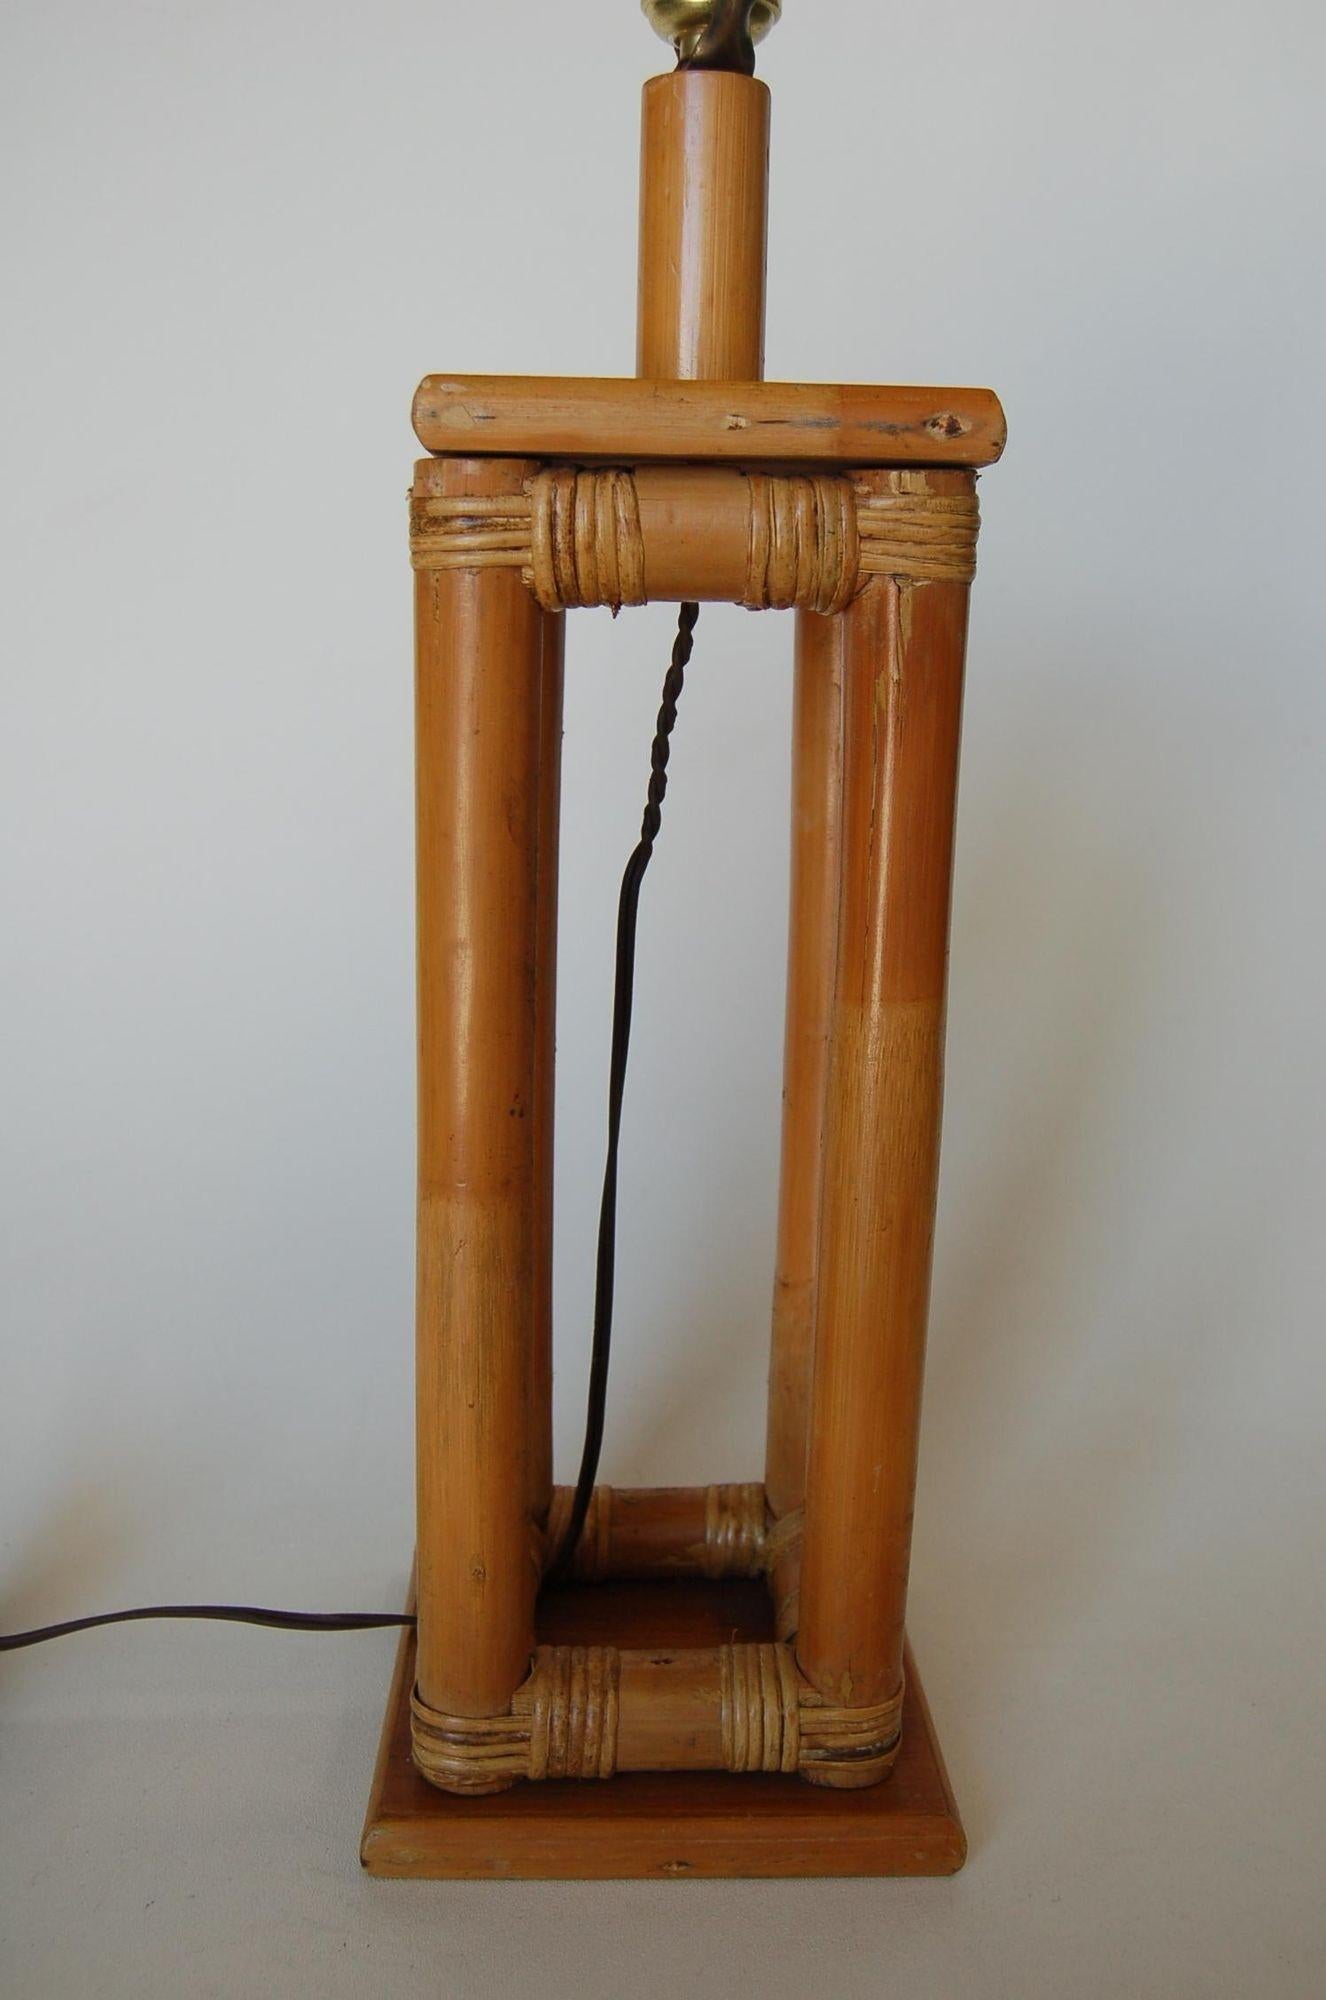 Restored Mid-Century rattan pao table lamp in box shape fixed to a square wood base

1950, United States

Measures: 6.5